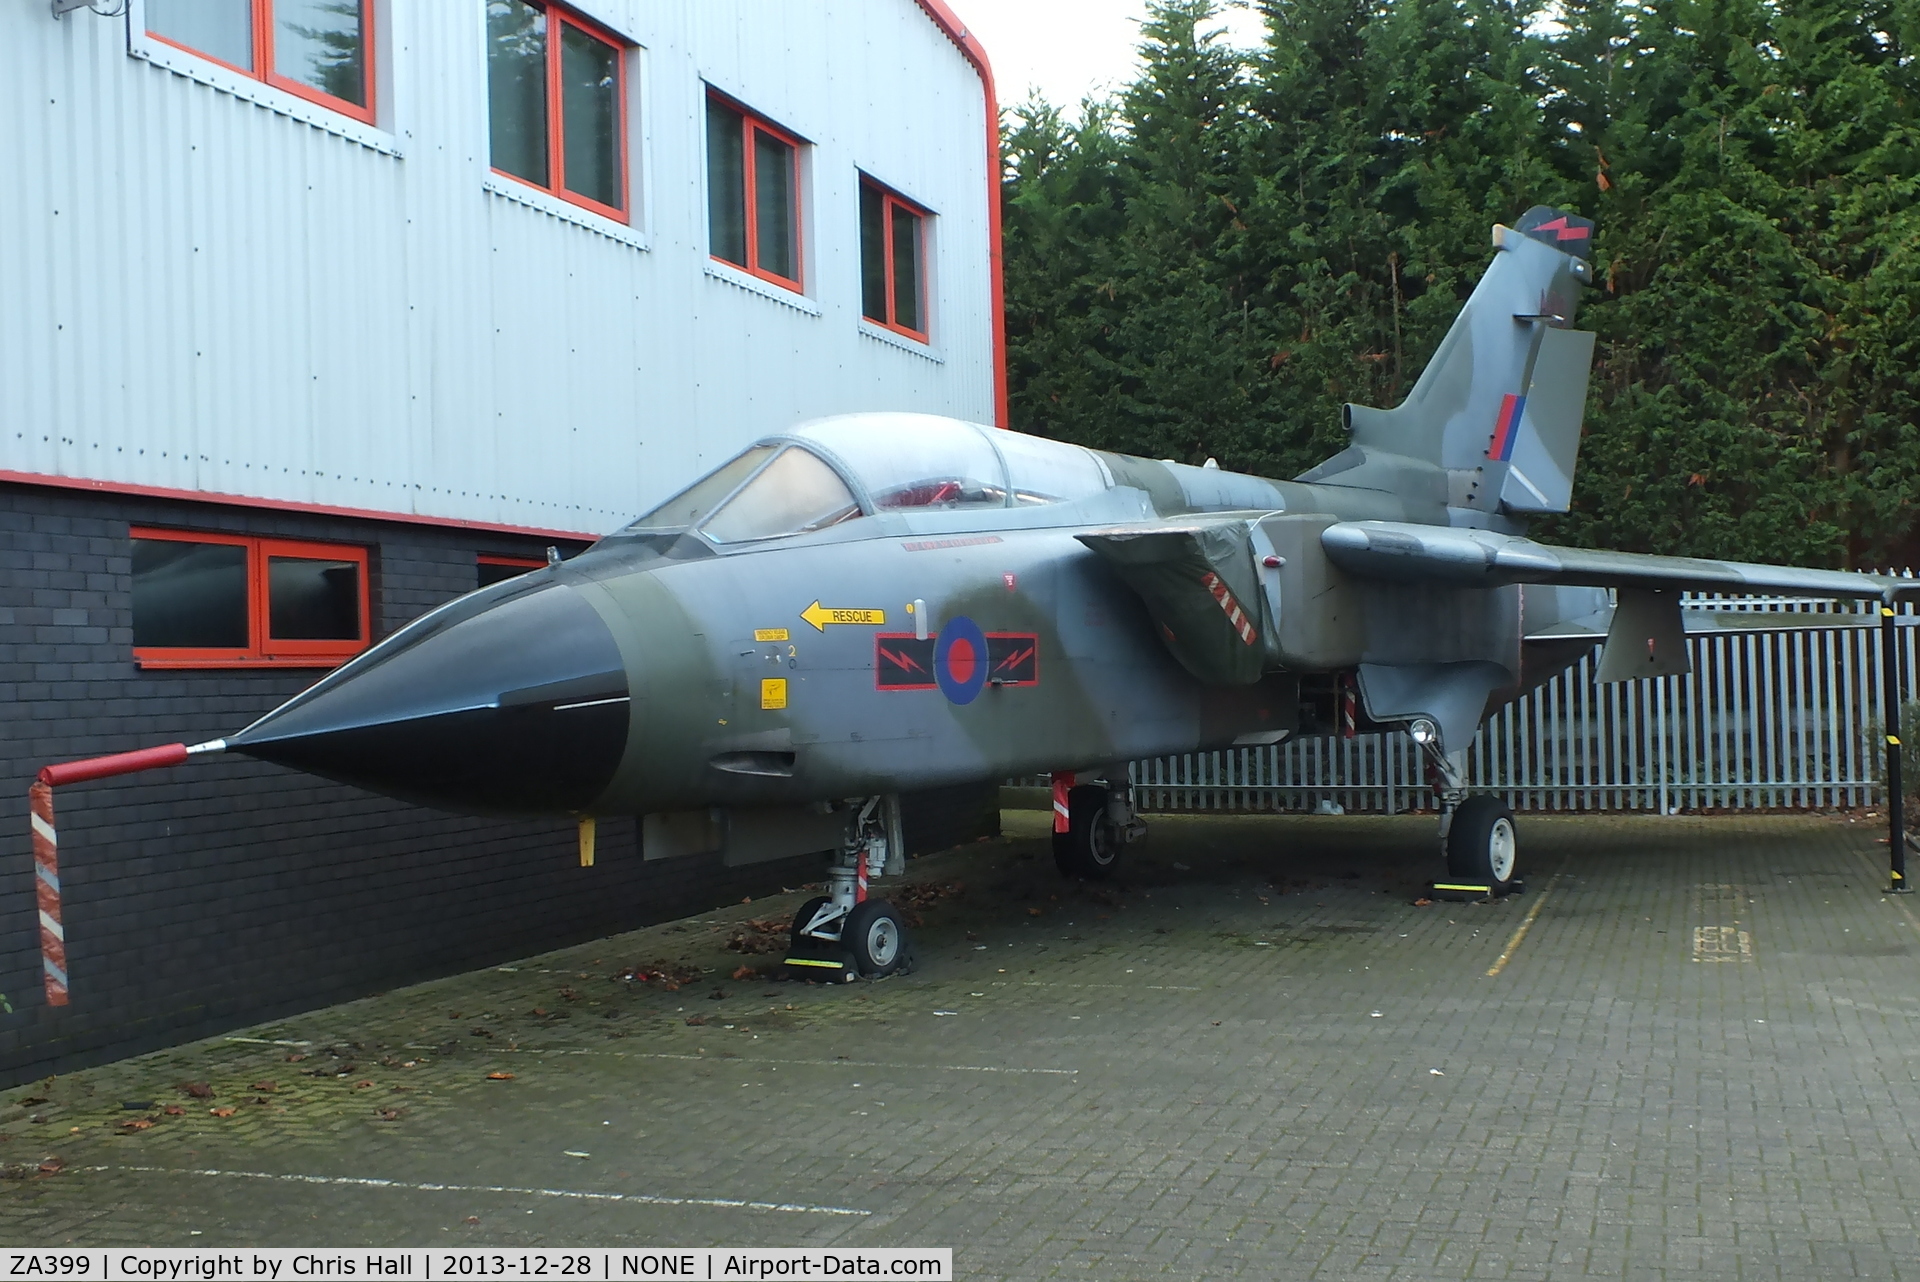 ZA399, 1982 Panavia Tornado GR.1 C/N 202/BS066/3098, Transferred to 617 squadron in 1992, then based at RAF Marham. Coded AJ-C in tribute to Lancaster ED910/AJ-C – lost 17th May 1943 – the aircraft wears the name of the Lancaster’s pilot, Pilot Officer Warner Ottley DFC.